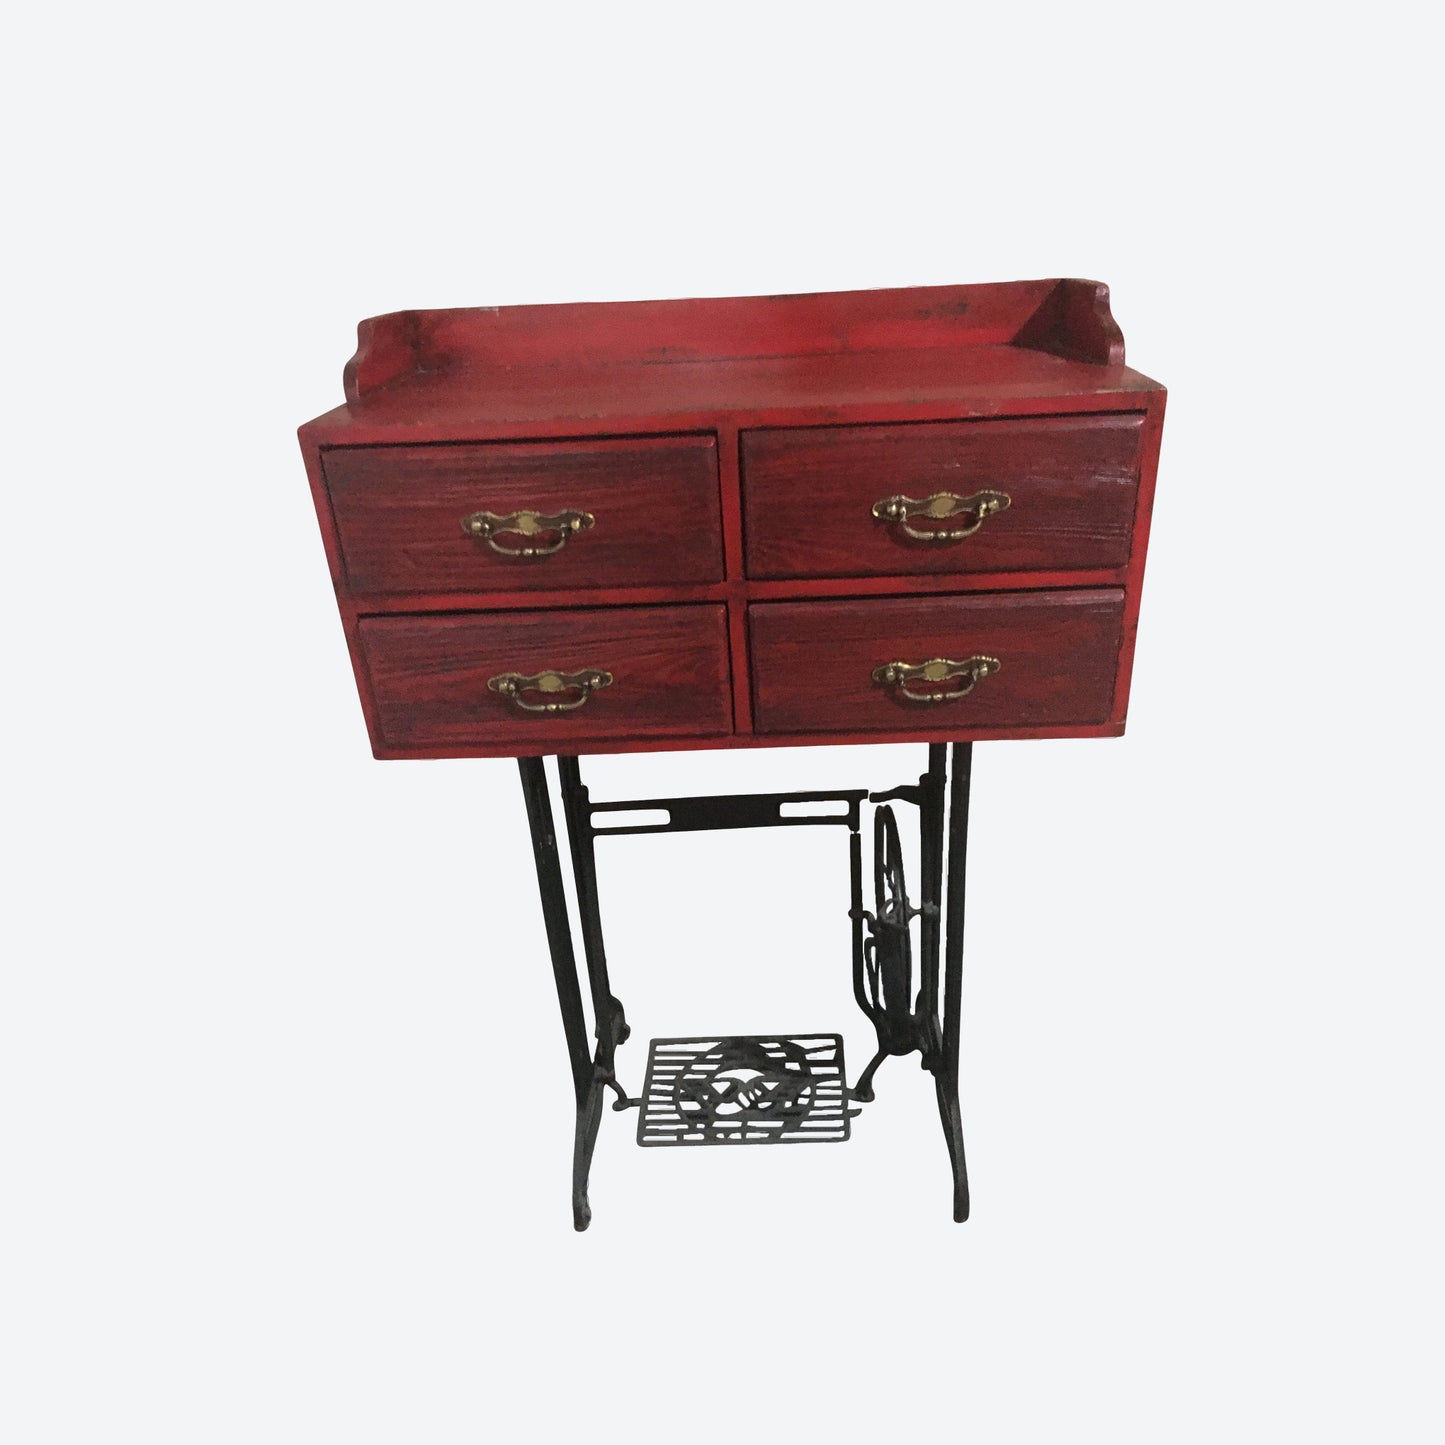 Red Rustic Table With Metal Legs And 4 Drawers -SK - SKU 1131